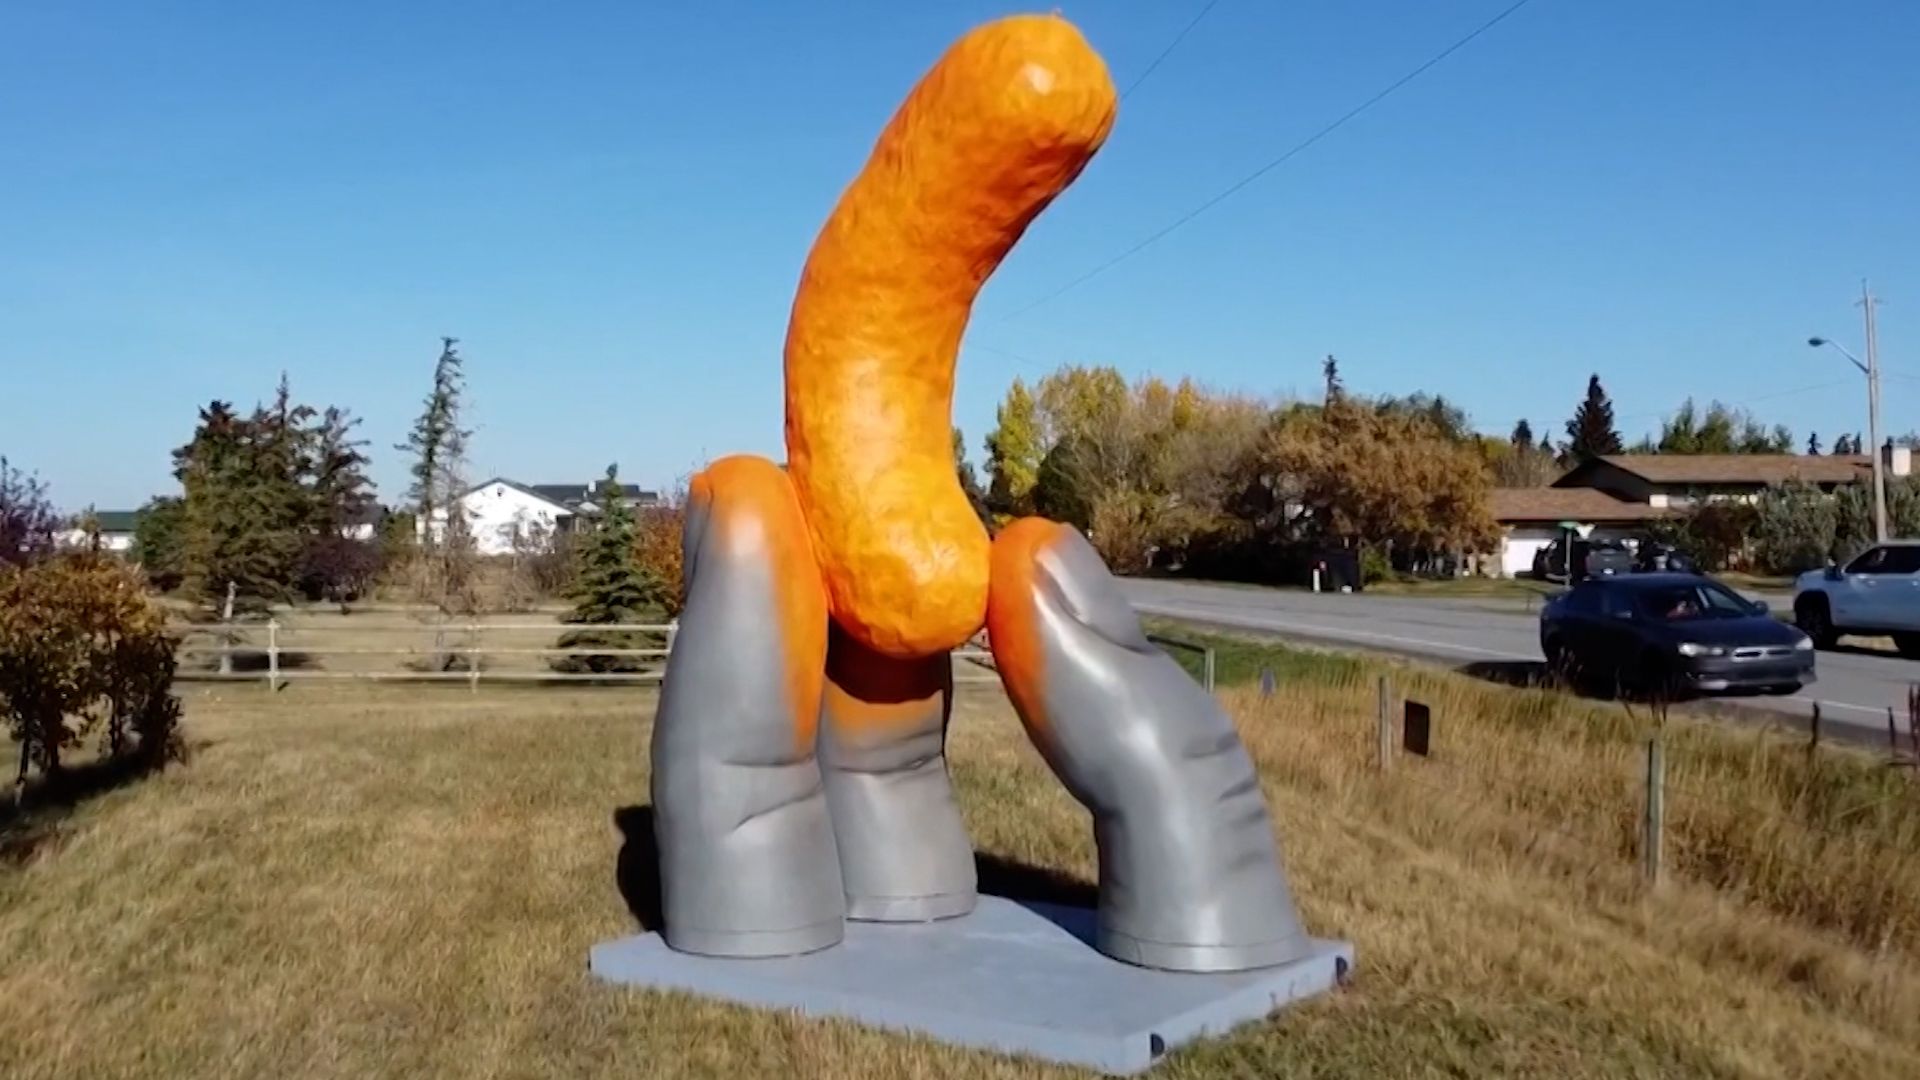 Cheetos installed a 17-foot-tall statue of a Cheeto-dust-covered